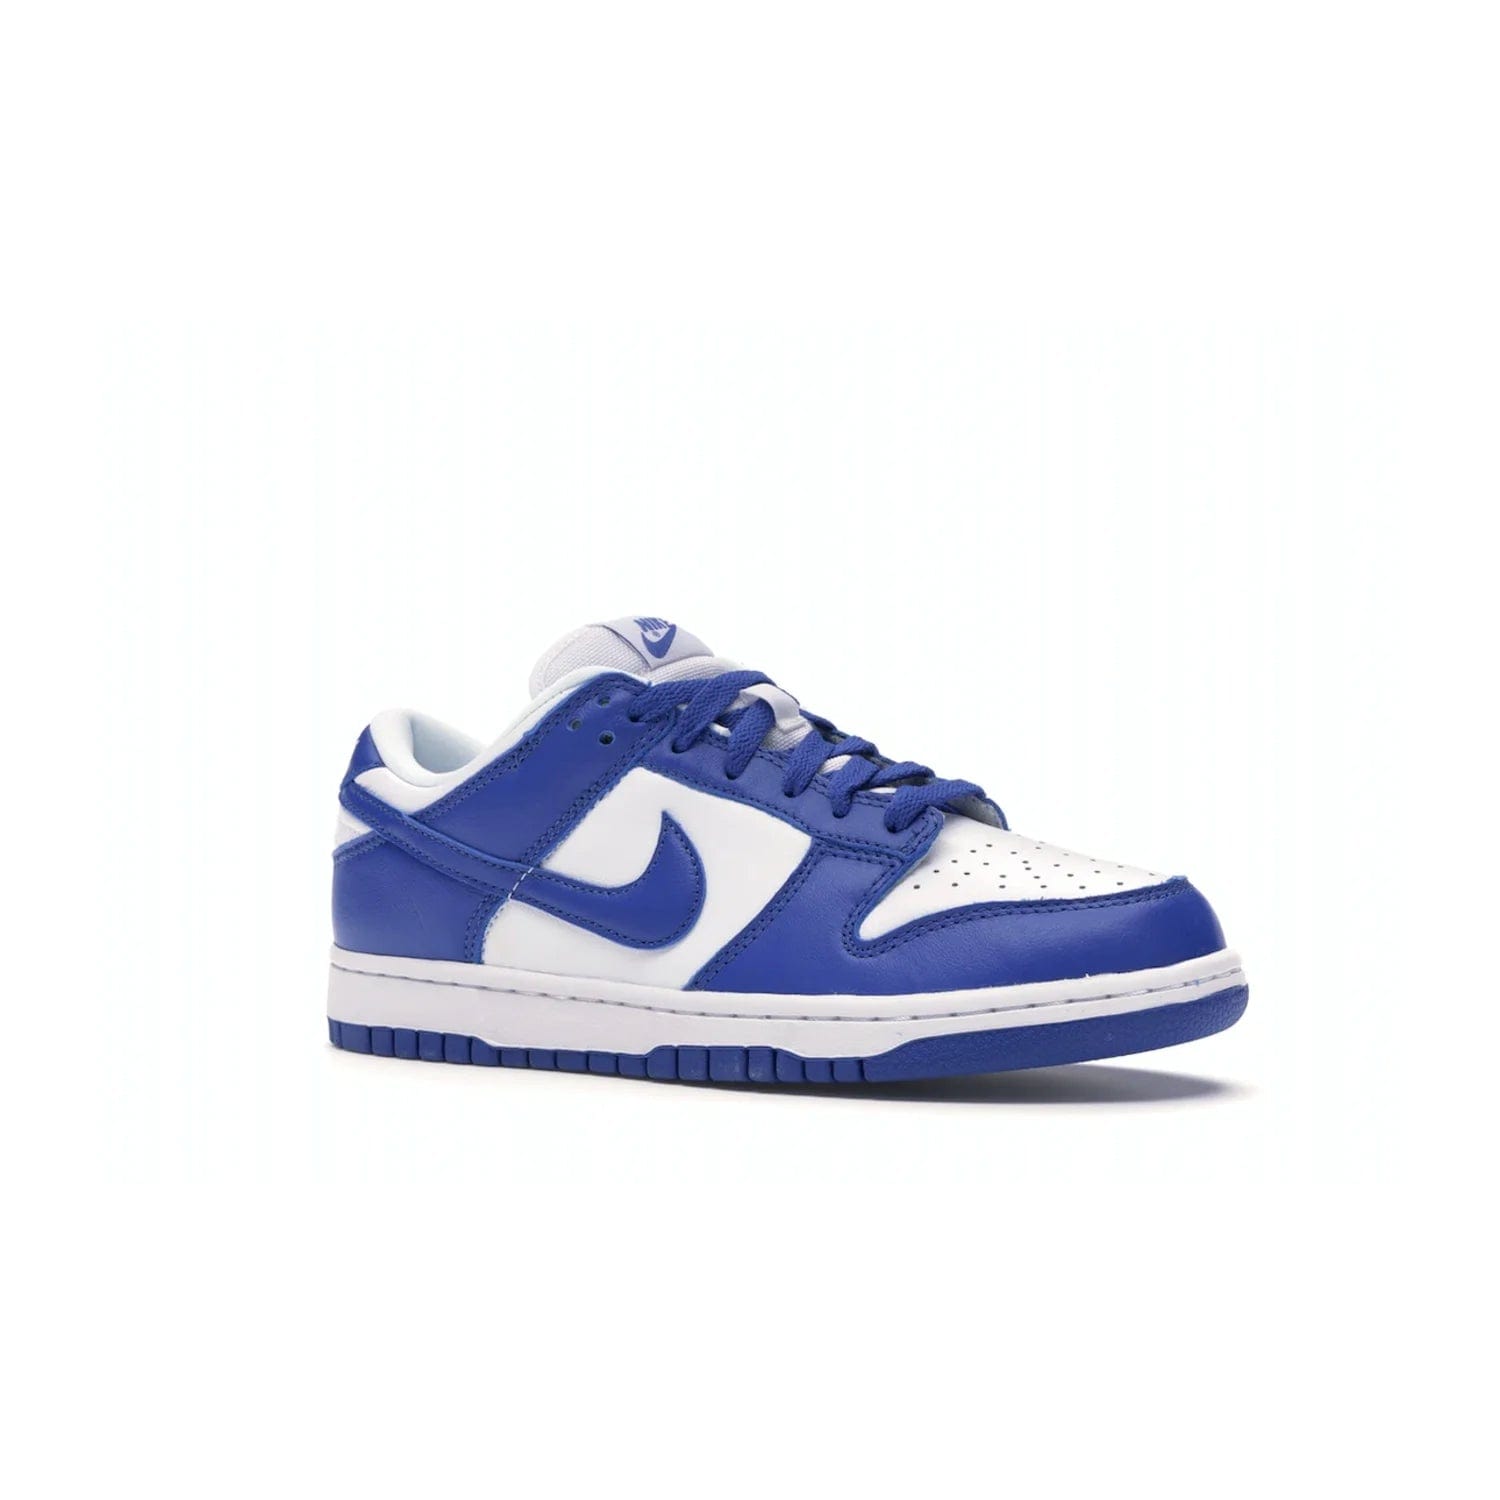 Nike Dunk Low SP Kentucky (2020/2022) - Image 4 - Only at www.BallersClubKickz.com - Classic Nike Dunk Low SP Kentucky with timeless White/Varsity Royal colorway. White leather upper, royal outsole, and Nike branding. A hit since March 2020 homage to the 1985 Nike College Colors program. Show your support with these classic kicks.